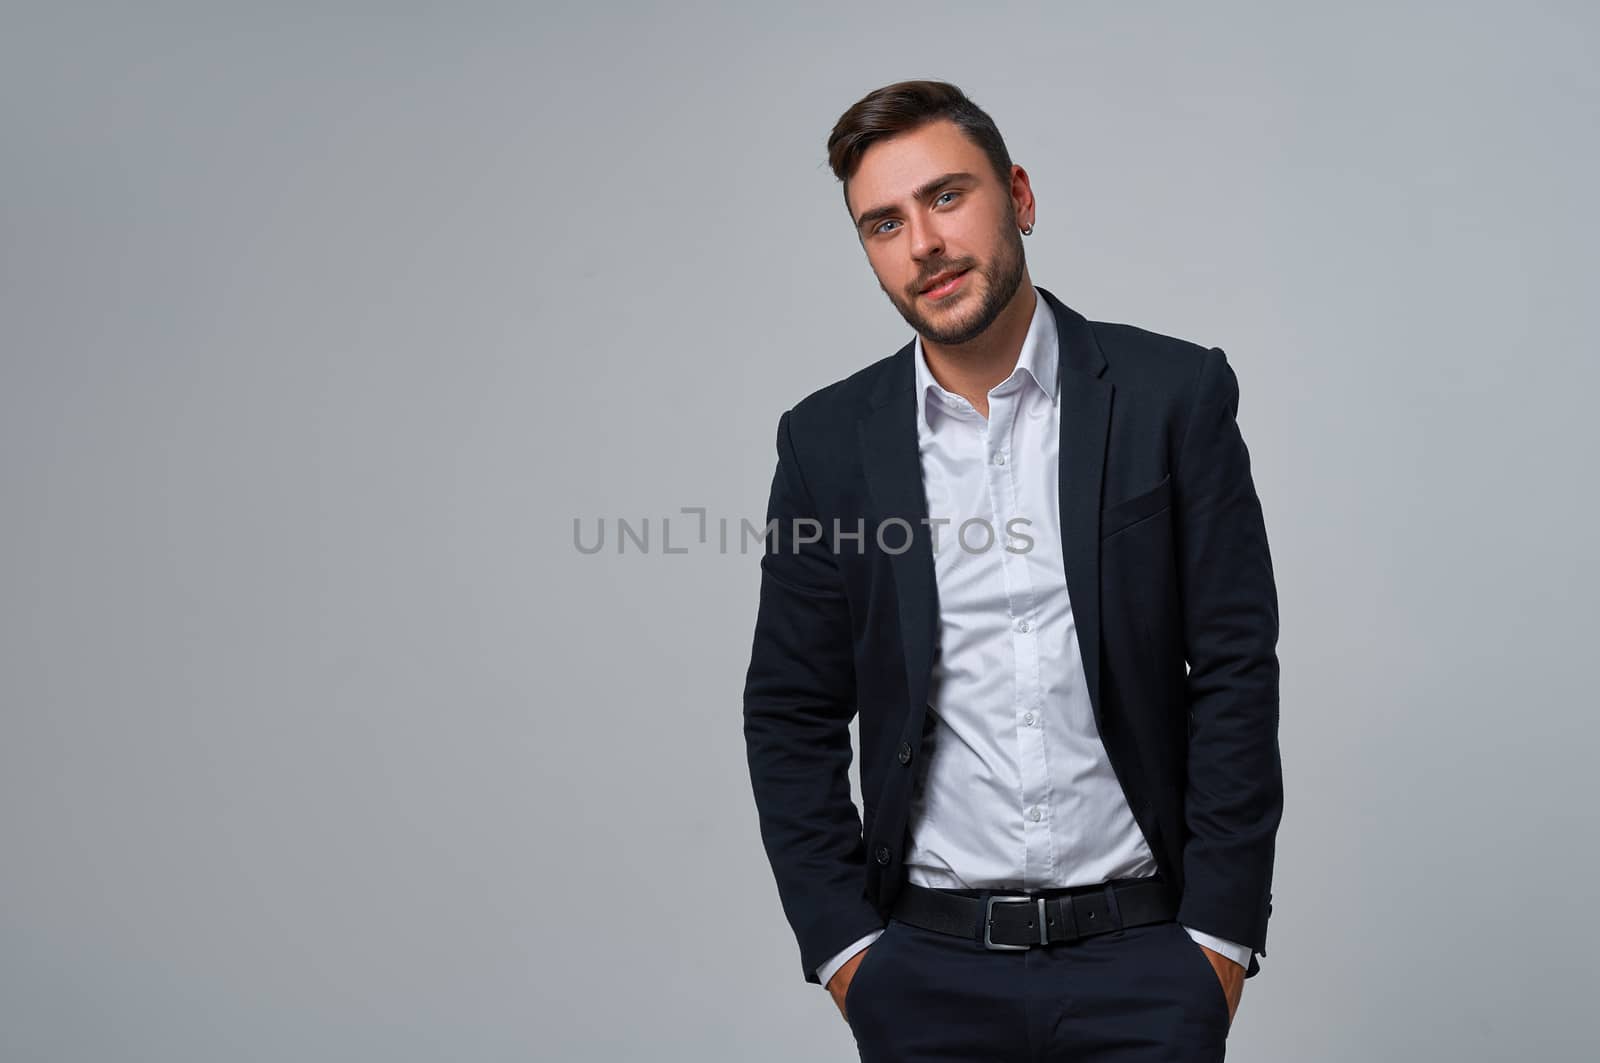 Businessman Business person. Man business suit studio gray background. Modern business person stylish haircut earring in ear. Portrait of charming successful young entrepreneur